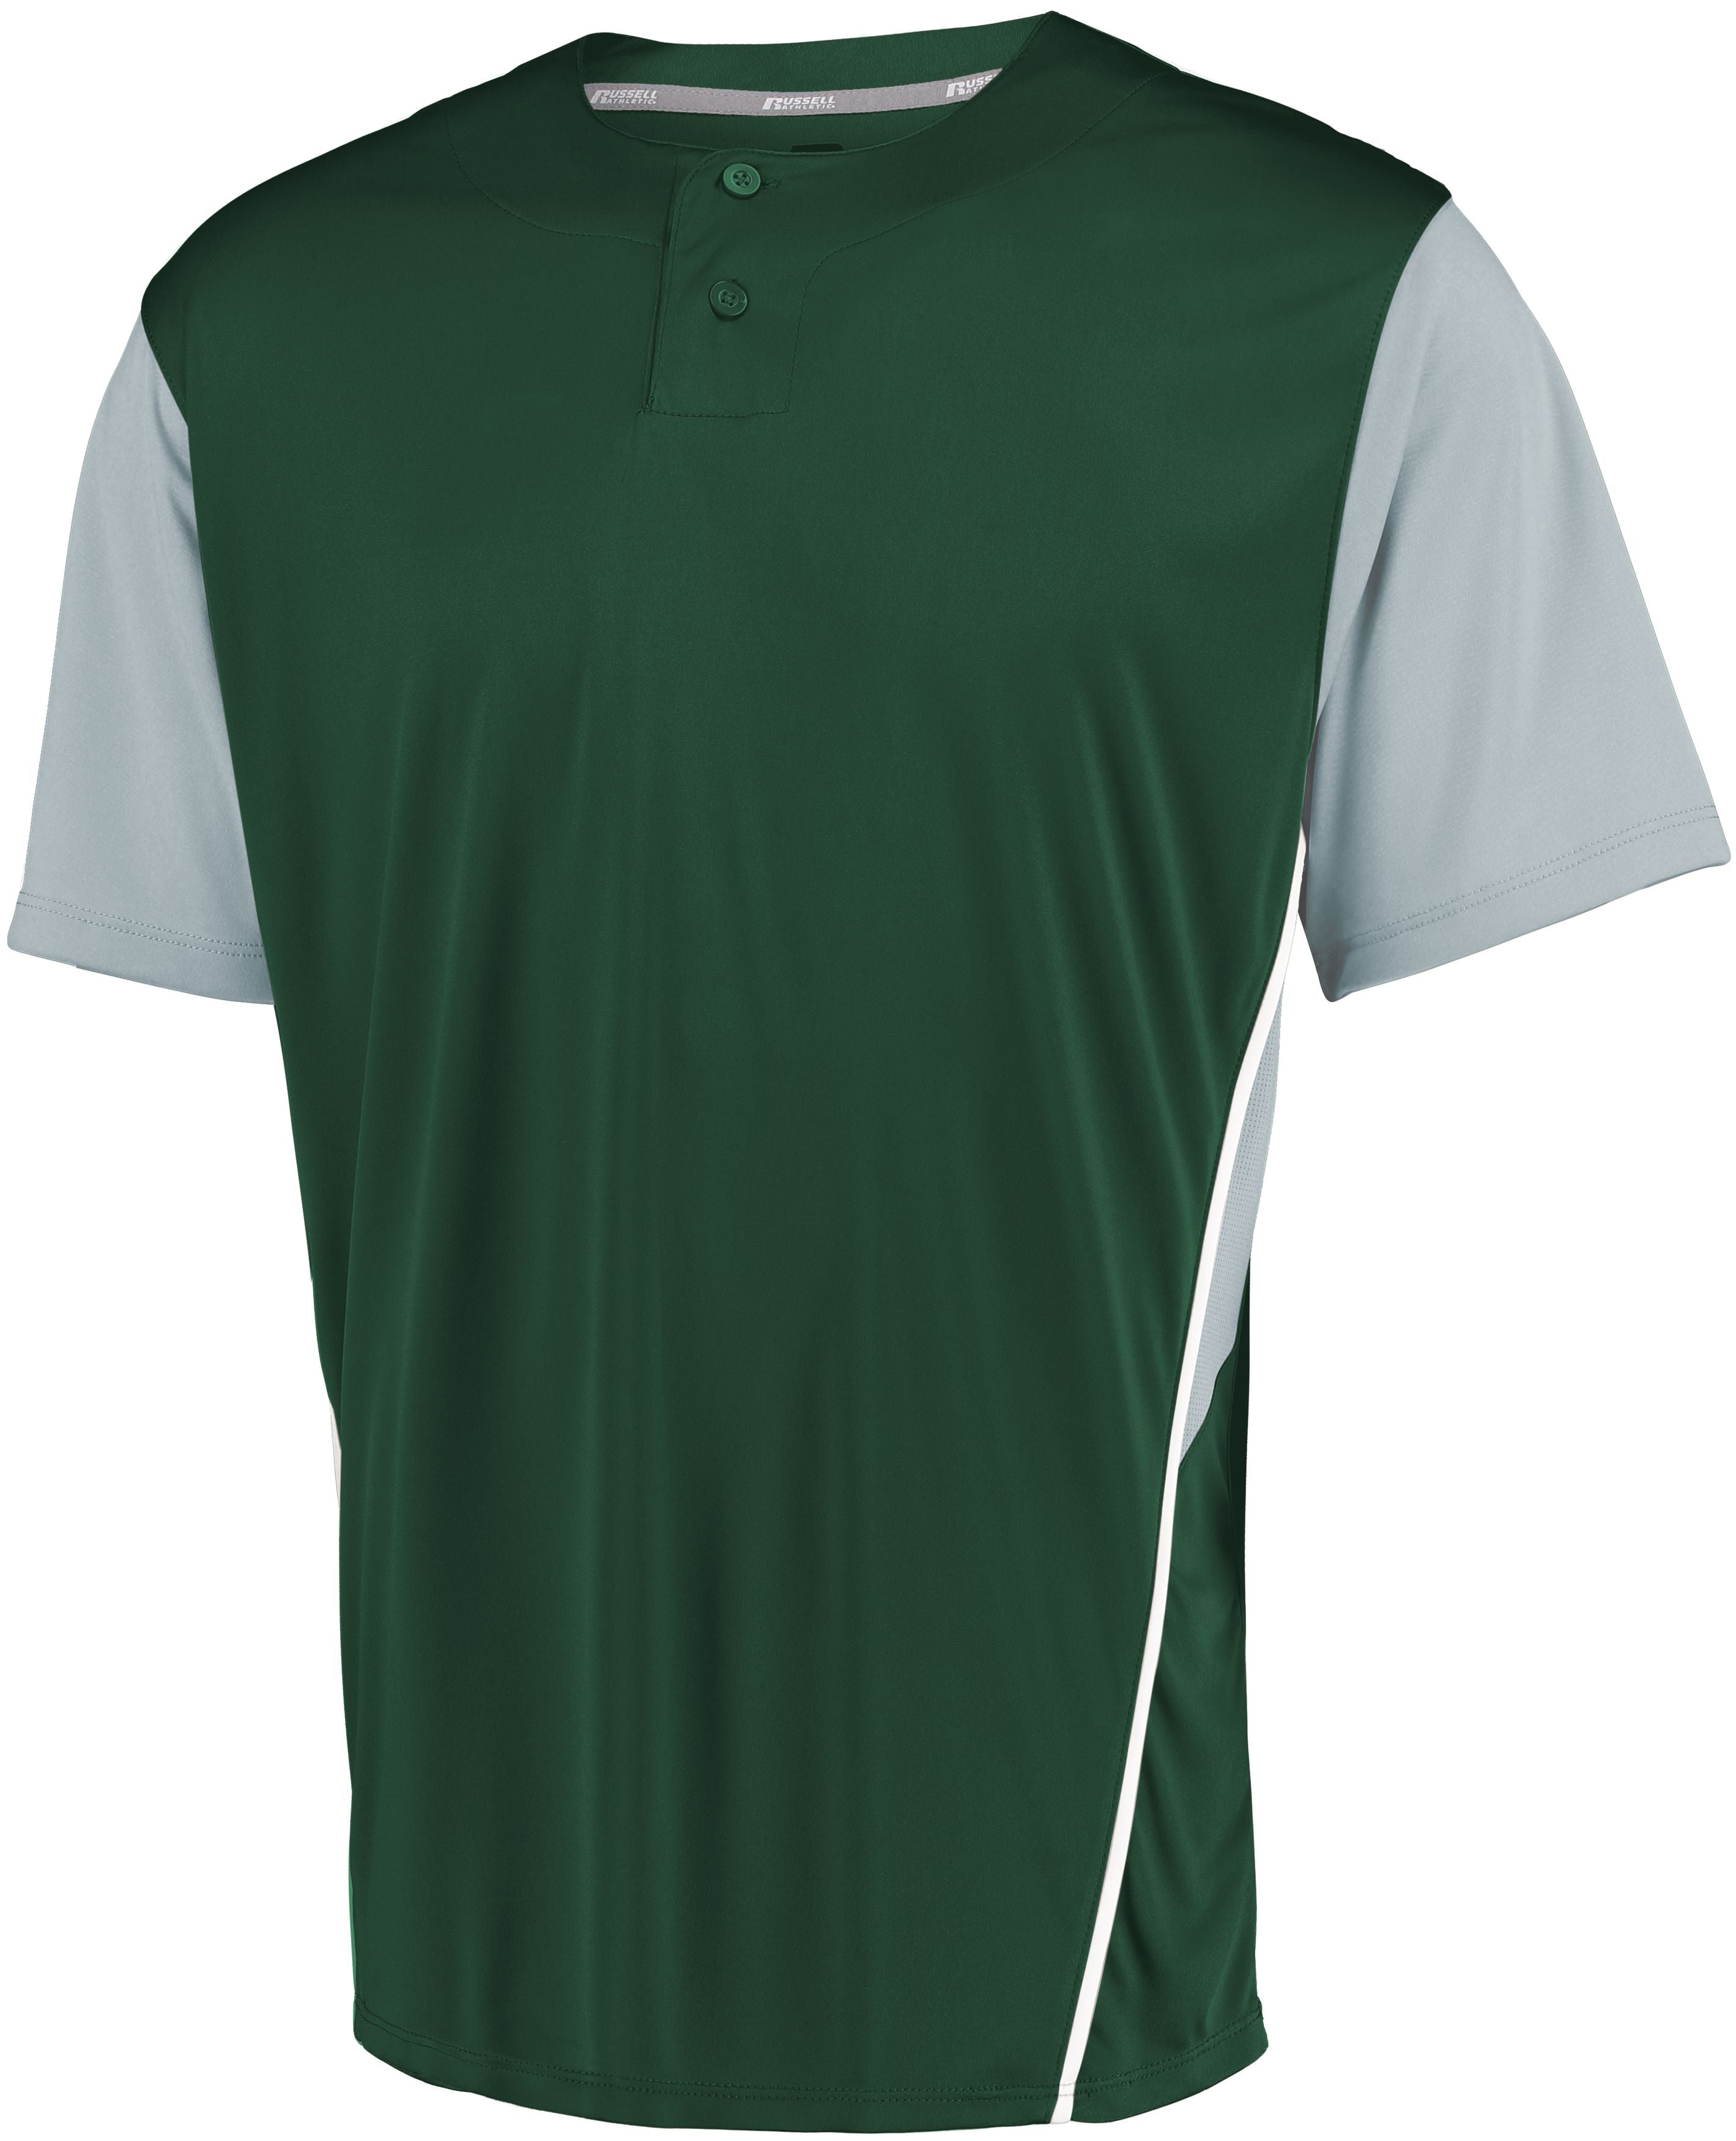 Russell Athletic Youth Two-Button Placket Jersey in Dark Green/Baseball Grey  -Part of the Youth, Youth-Jersey, Baseball, Russell-Athletic-Products, Shirts, All-Sports, All-Sports-1 product lines at KanaleyCreations.com